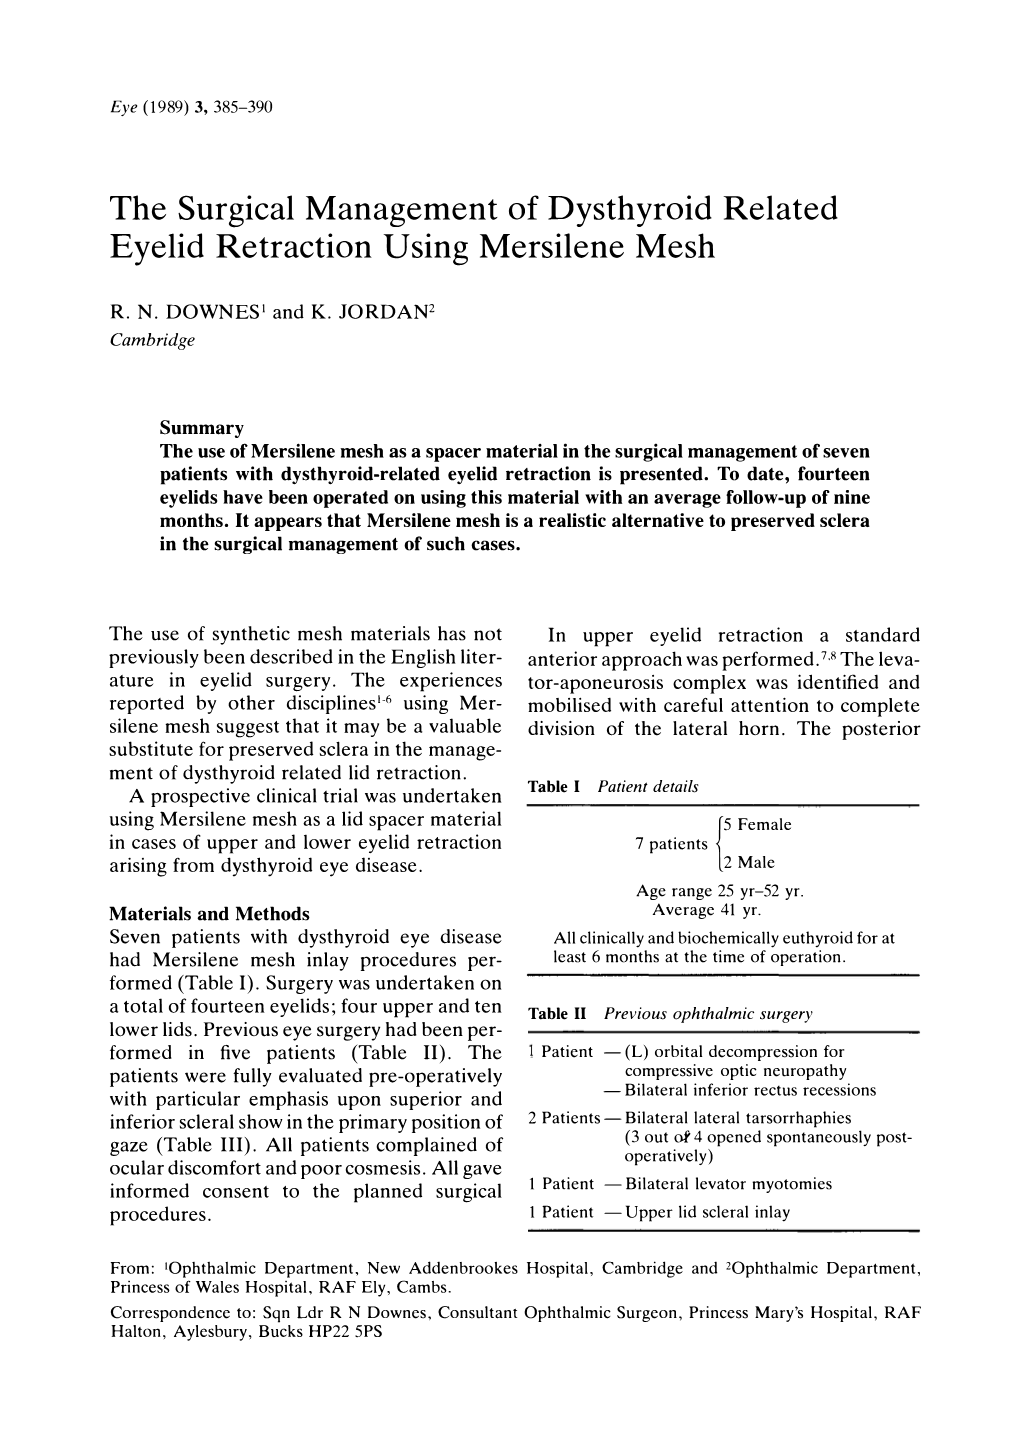 The Surgical Management of Dysthyroid Related Eyelid Retraction Using Mersilene Mesh